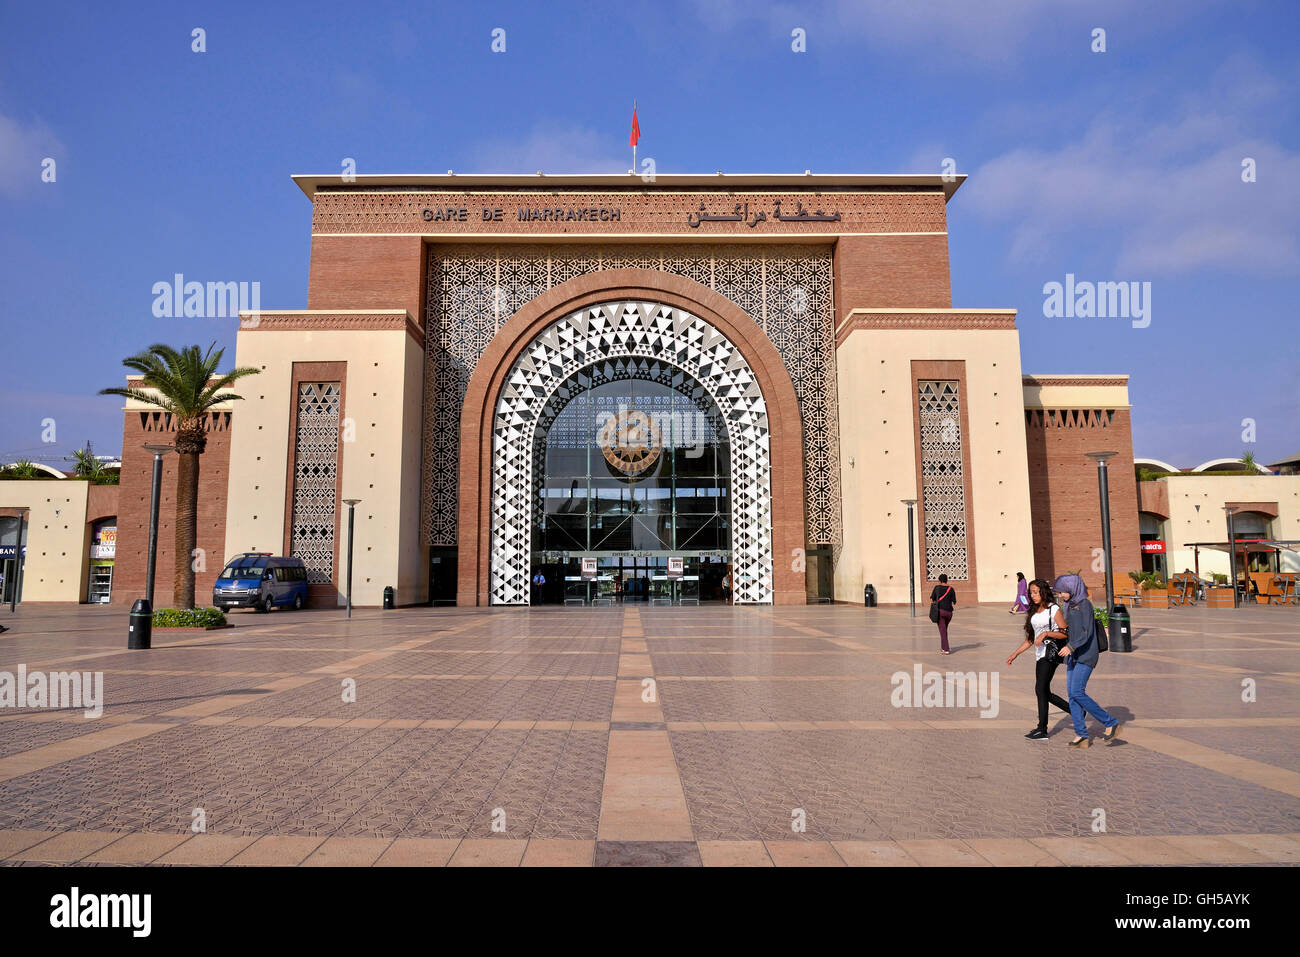 geography / travel, Morocco, Gare de Marrakech, station building, &13, Marrakech, region Marrakesh-Tensift-El Haouz, Africa, Additional-Rights-Clearance-Info-Not-Available Stock Photo